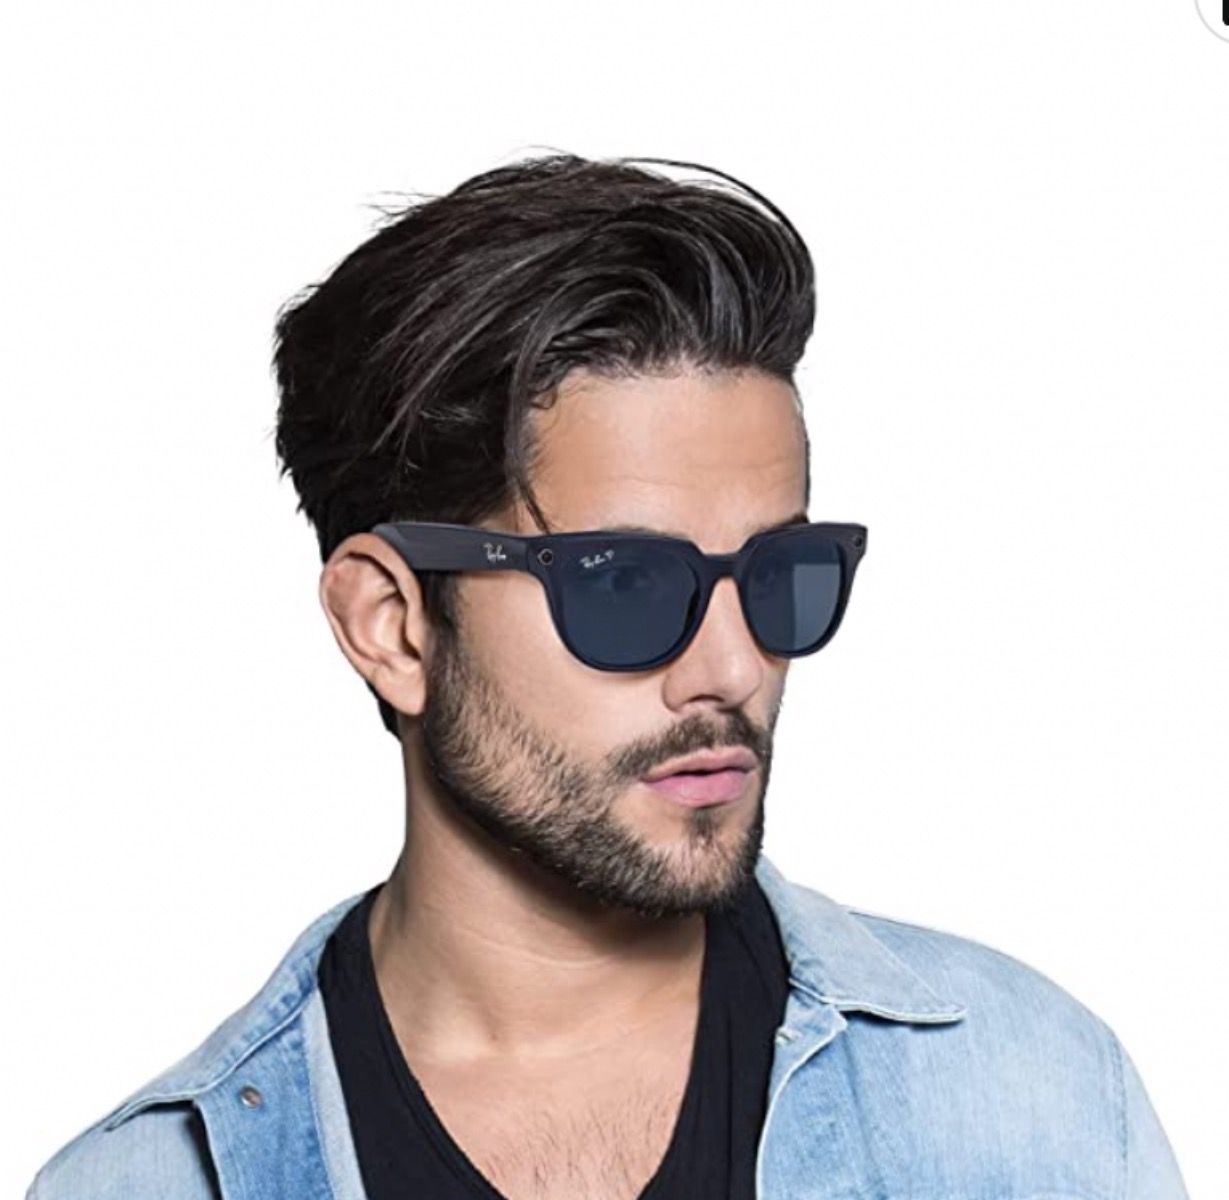 A pair of RayBan Stories Meteor Square sunglasses on a bearded man's face